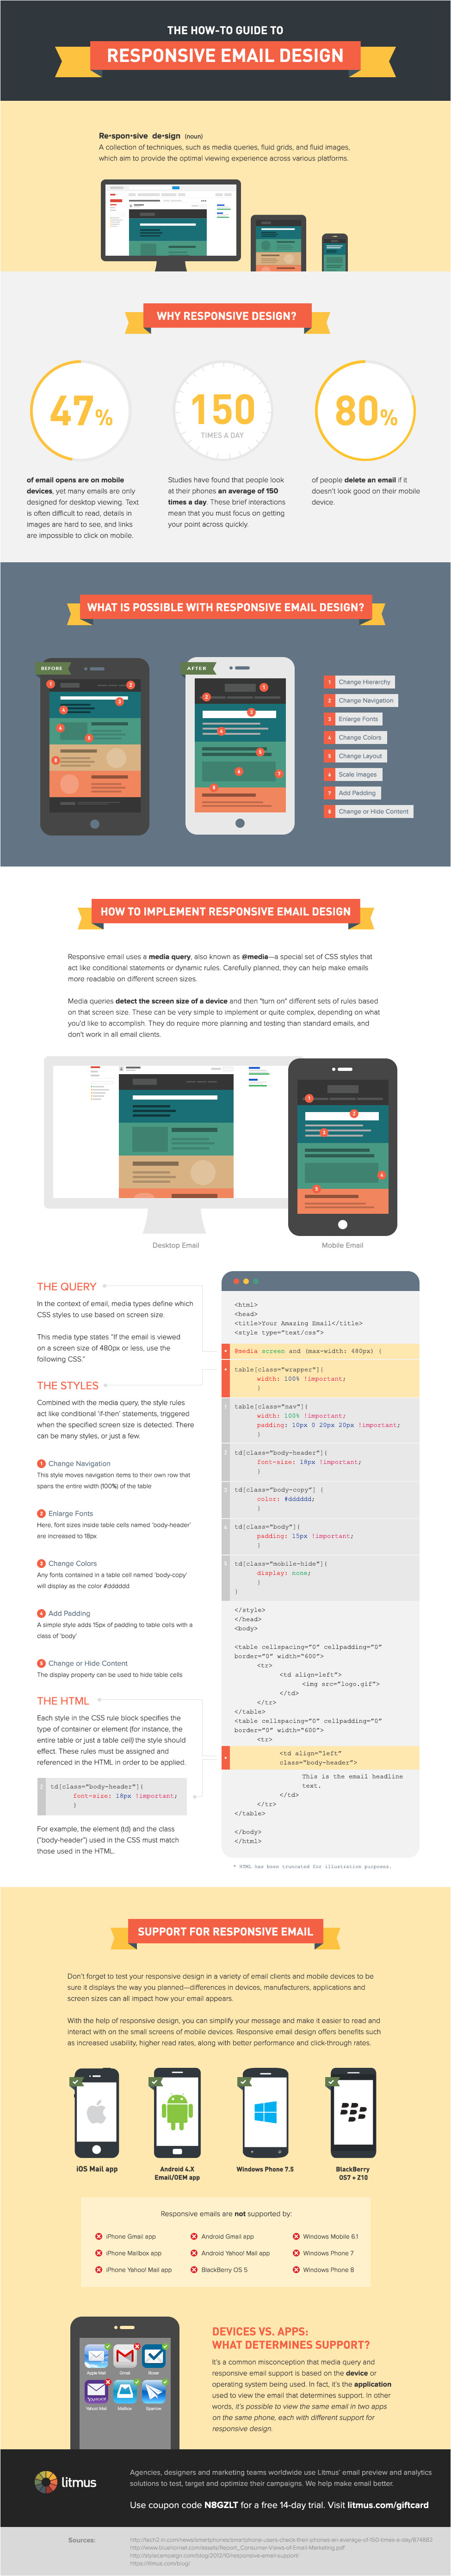 the how to guide to responsive email design infographic